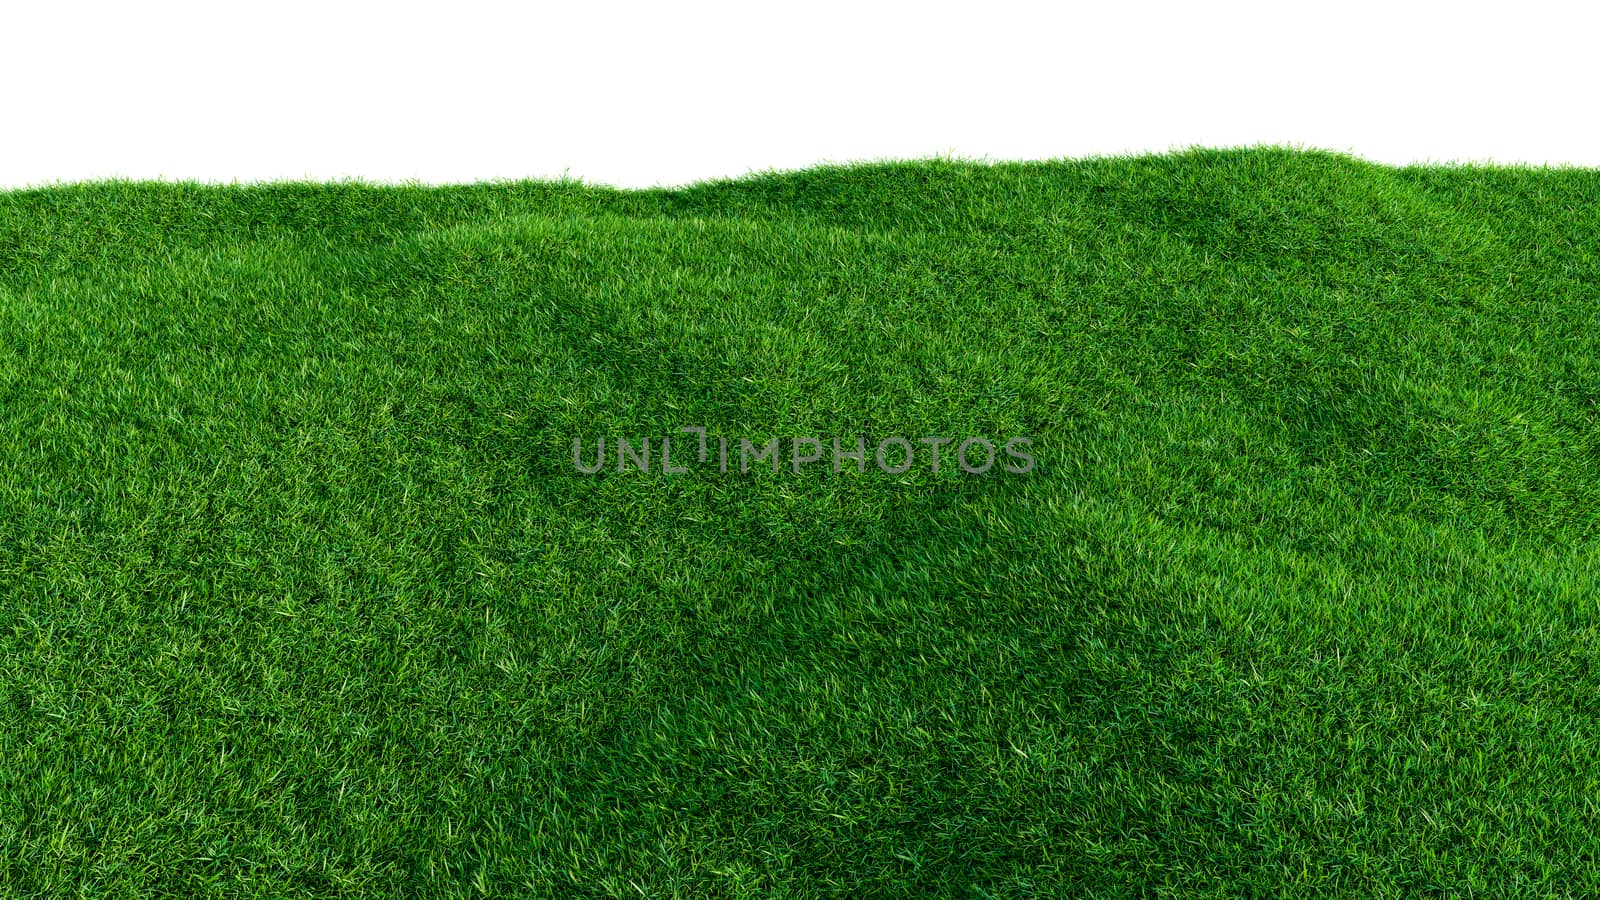 Green grass field on small hills, isolated on white background. 3d illustration